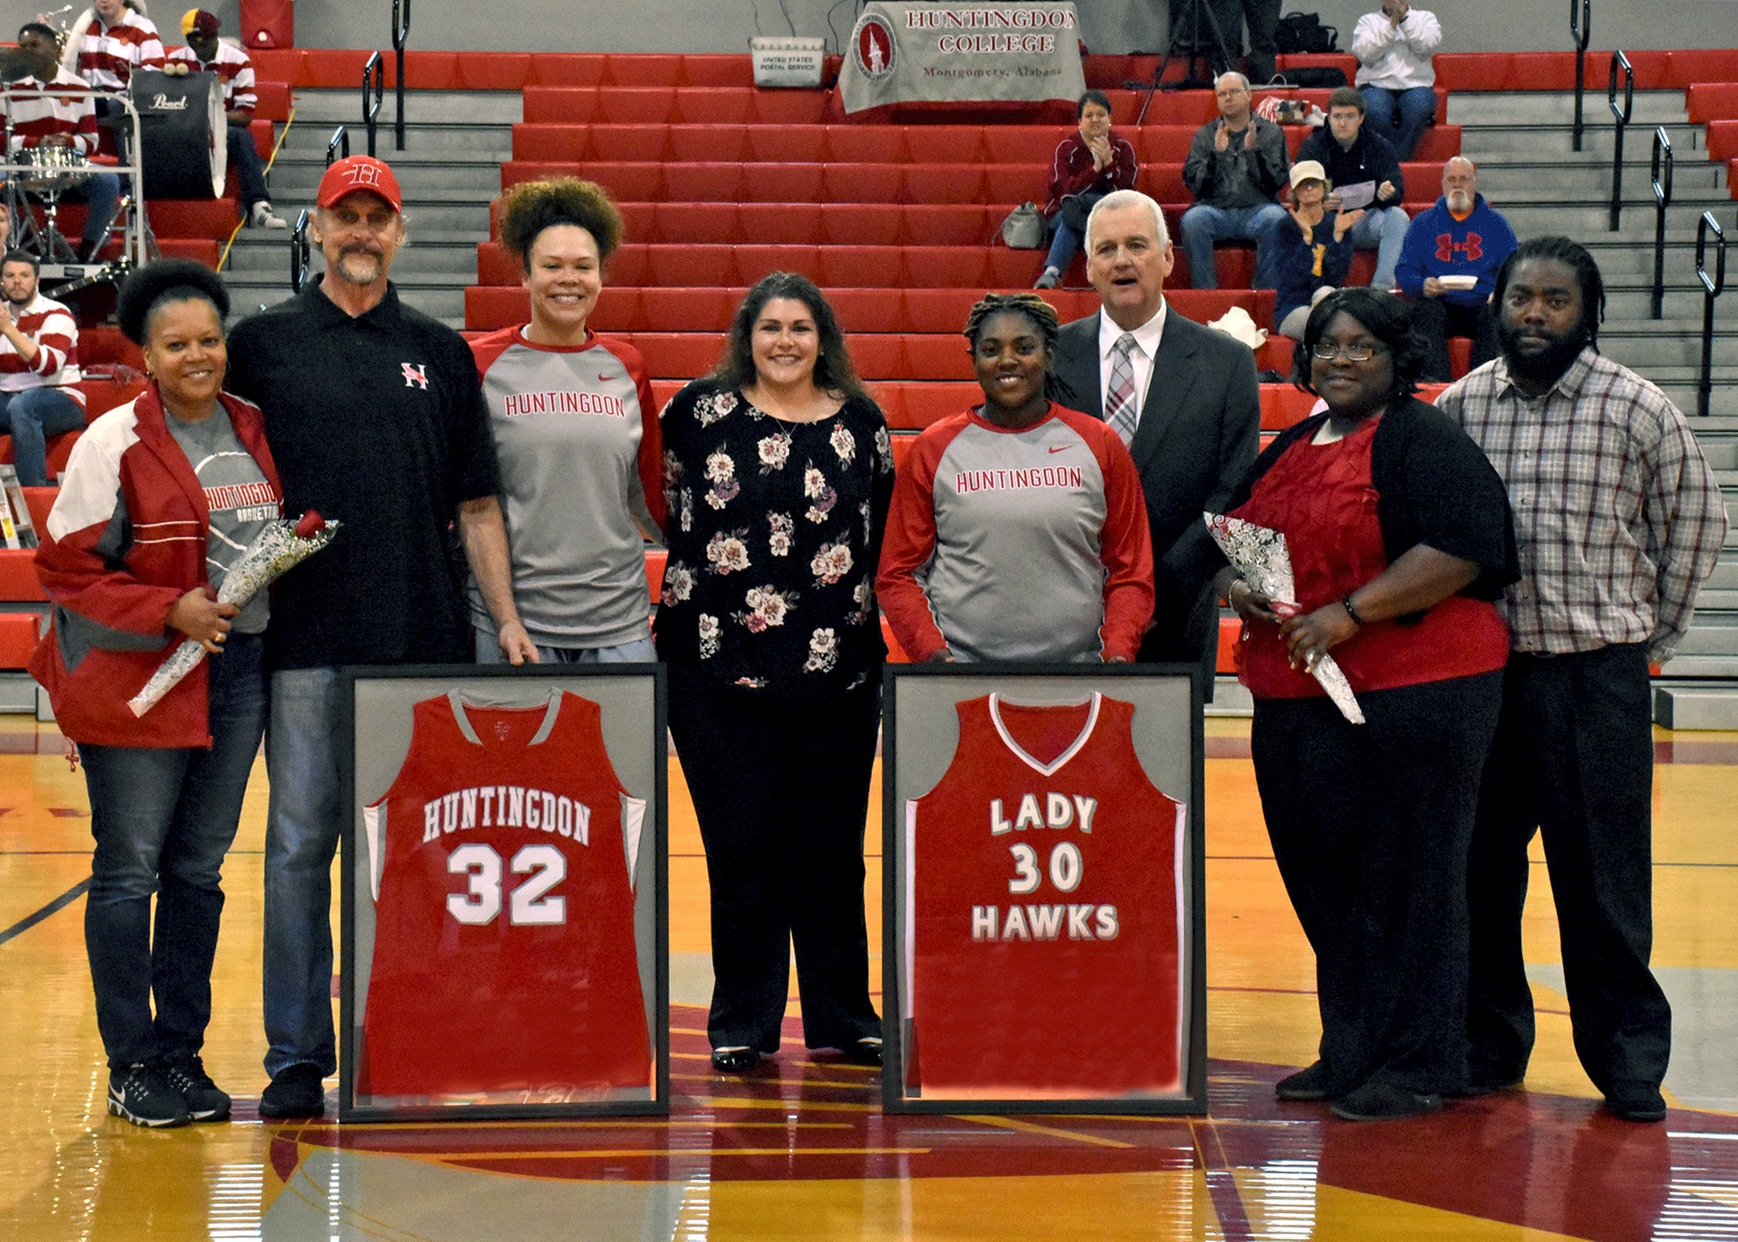 Harp becomes first Lady Hawk to reach 1,000 points and 1,000 rebounds